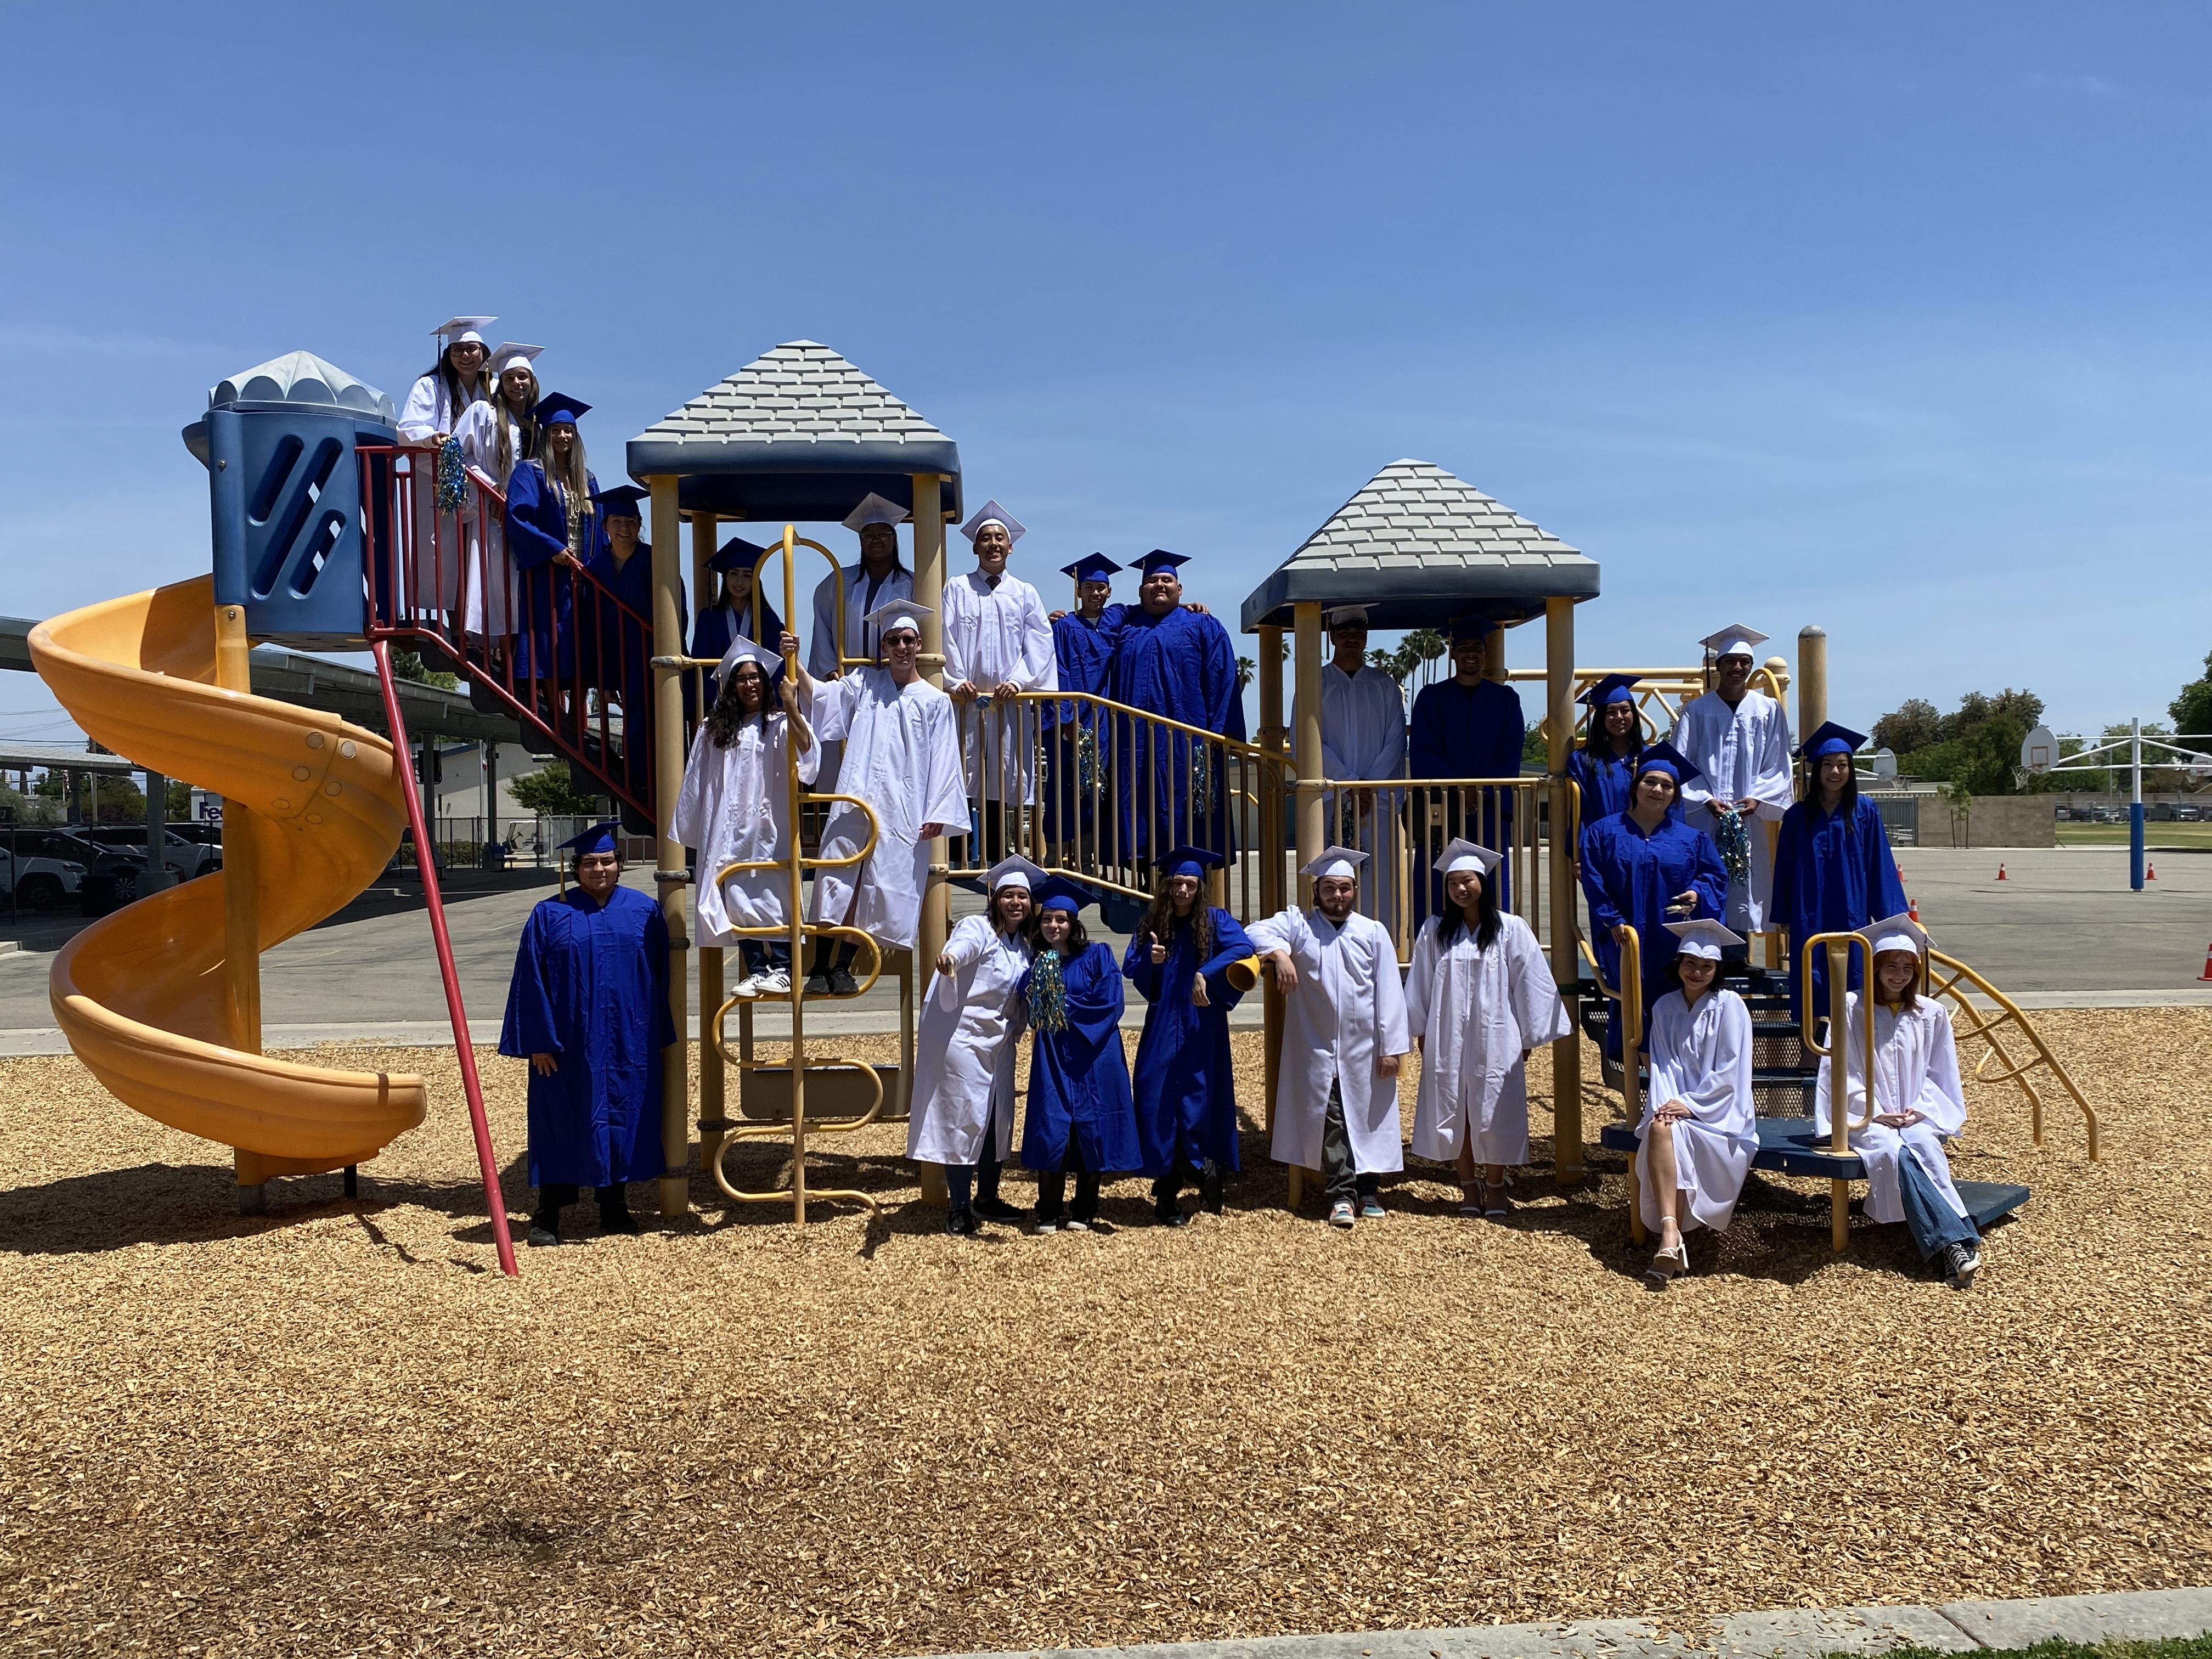 Picture of CHS Students on the Playground Equipment at SV